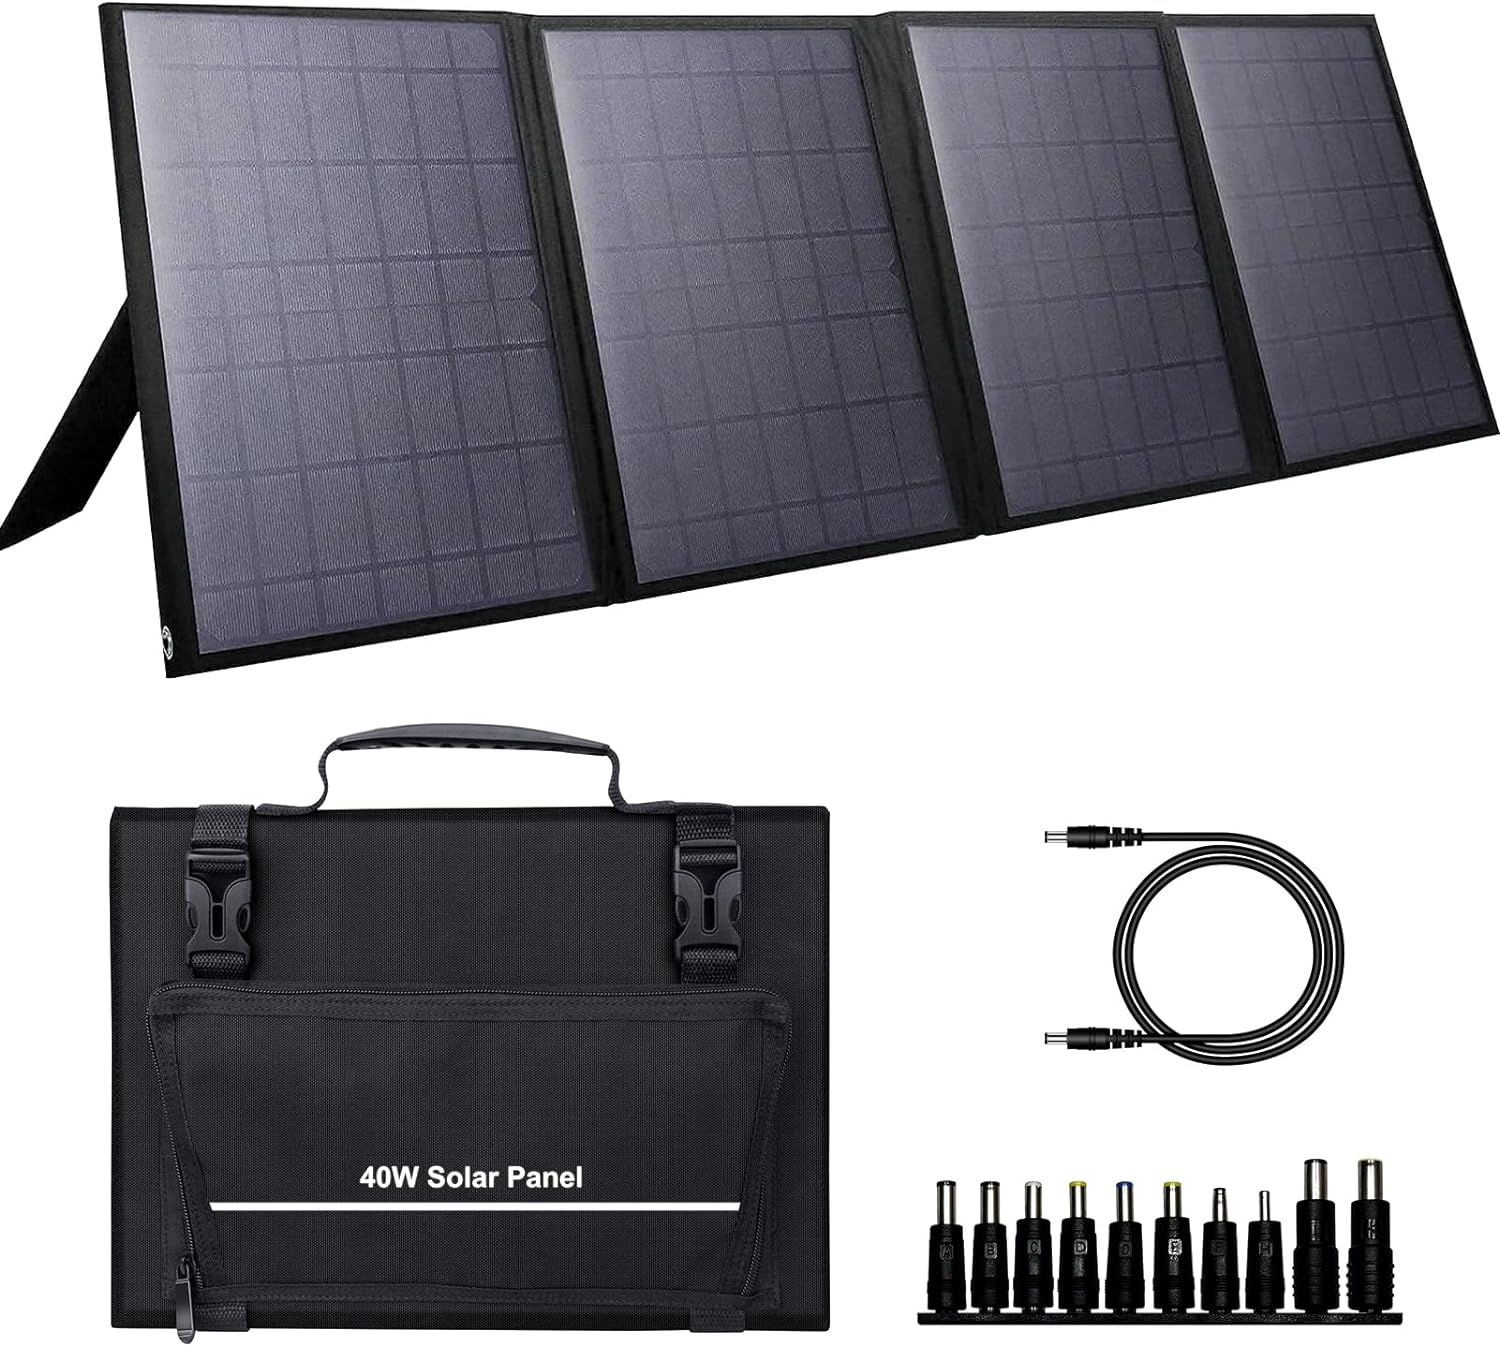 Portable Solar Panel 40W, Foldable Solar Charger for Outdoor Solar Generator Power Station, Adjustable Kickstand,10 in 1 Connectors,DC to DC Cable,USB QC3.0 Output for Camping RV Road Trip Adventure - Portable Solar Panel 40W Review